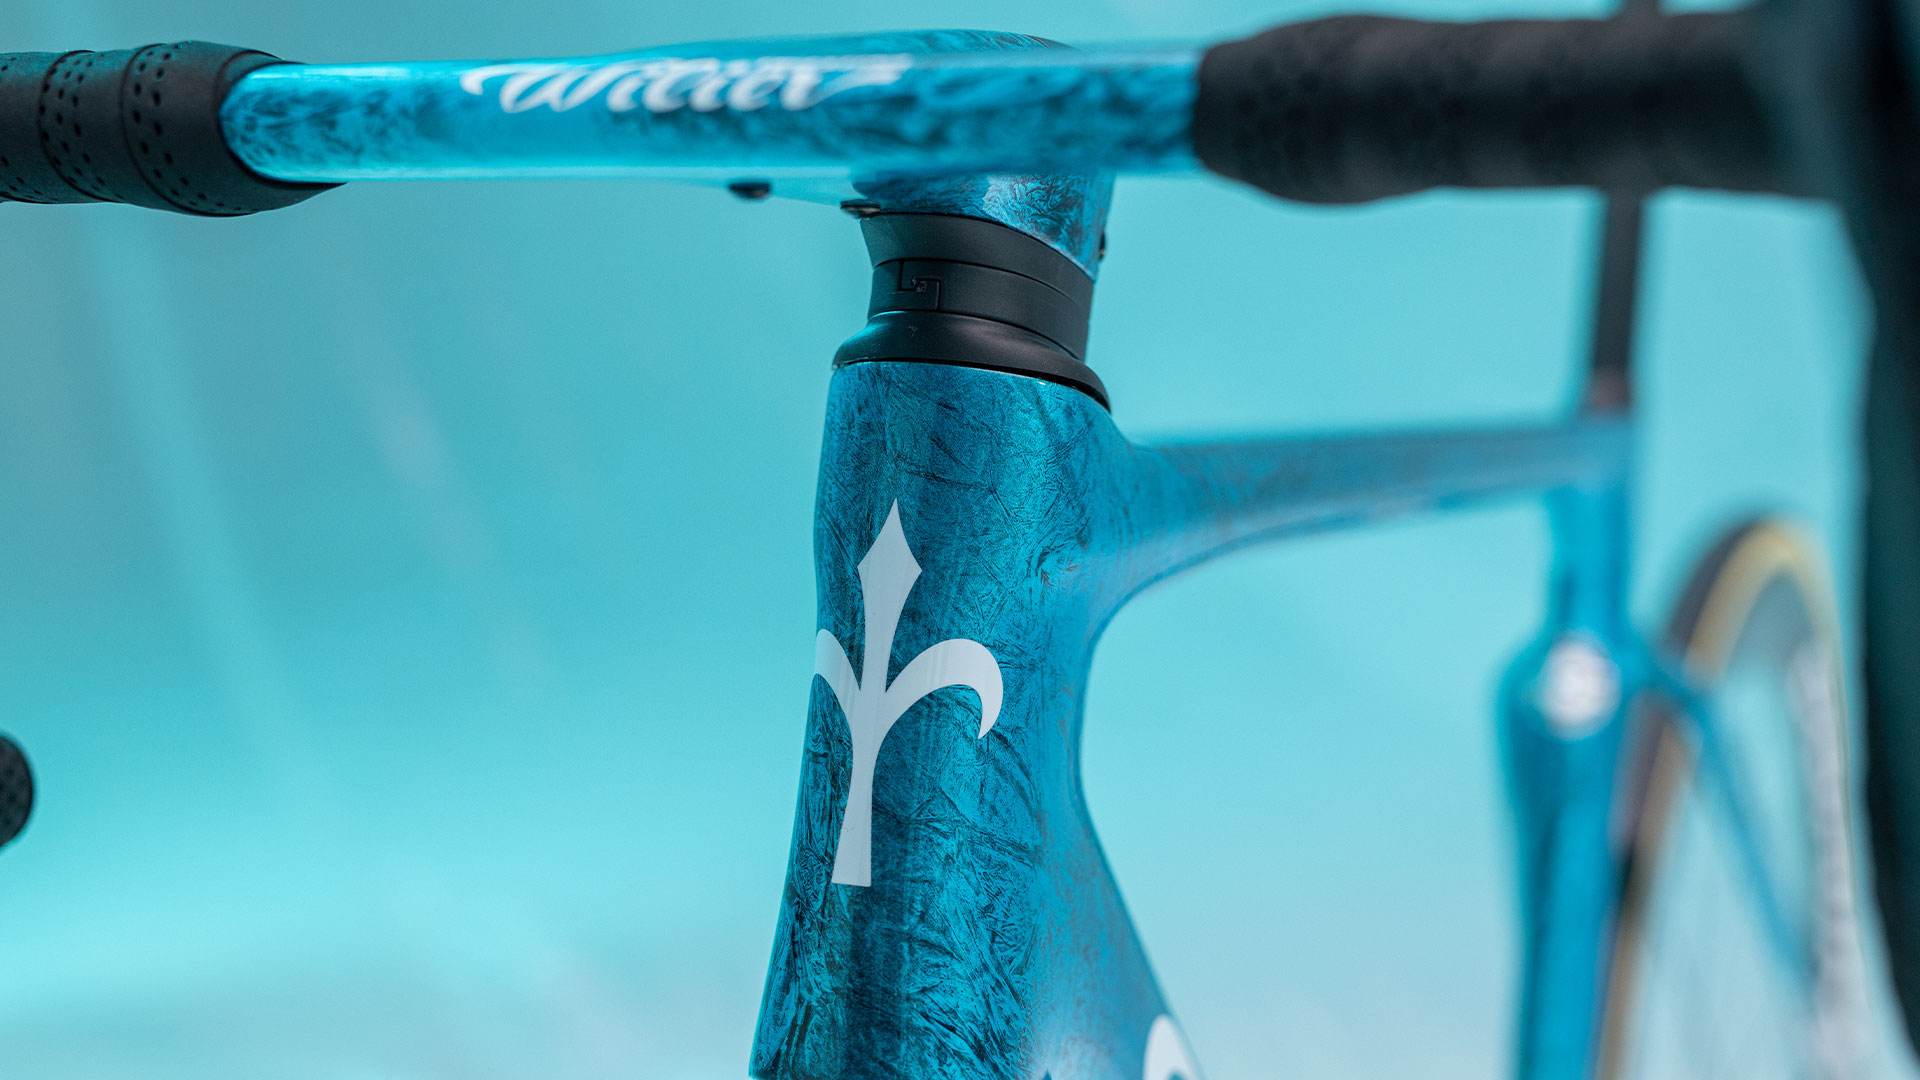 It's all about the detail: the new livery for the Astana Qazaqstan Team in 2023